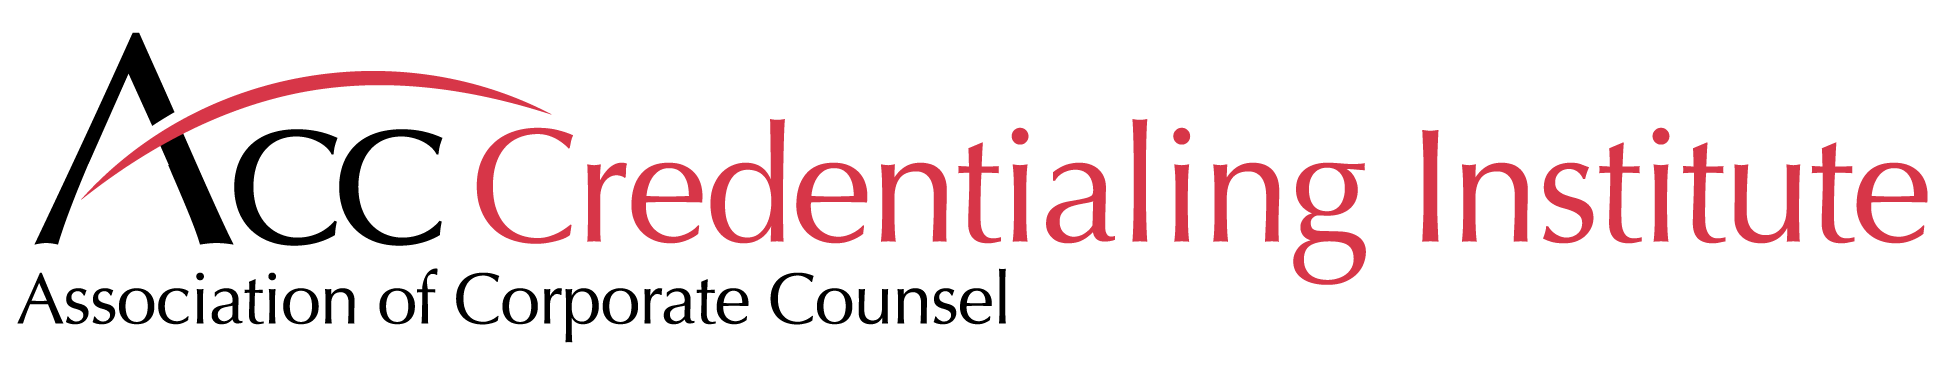 Association of Corporate Counsel Credentialing Institute